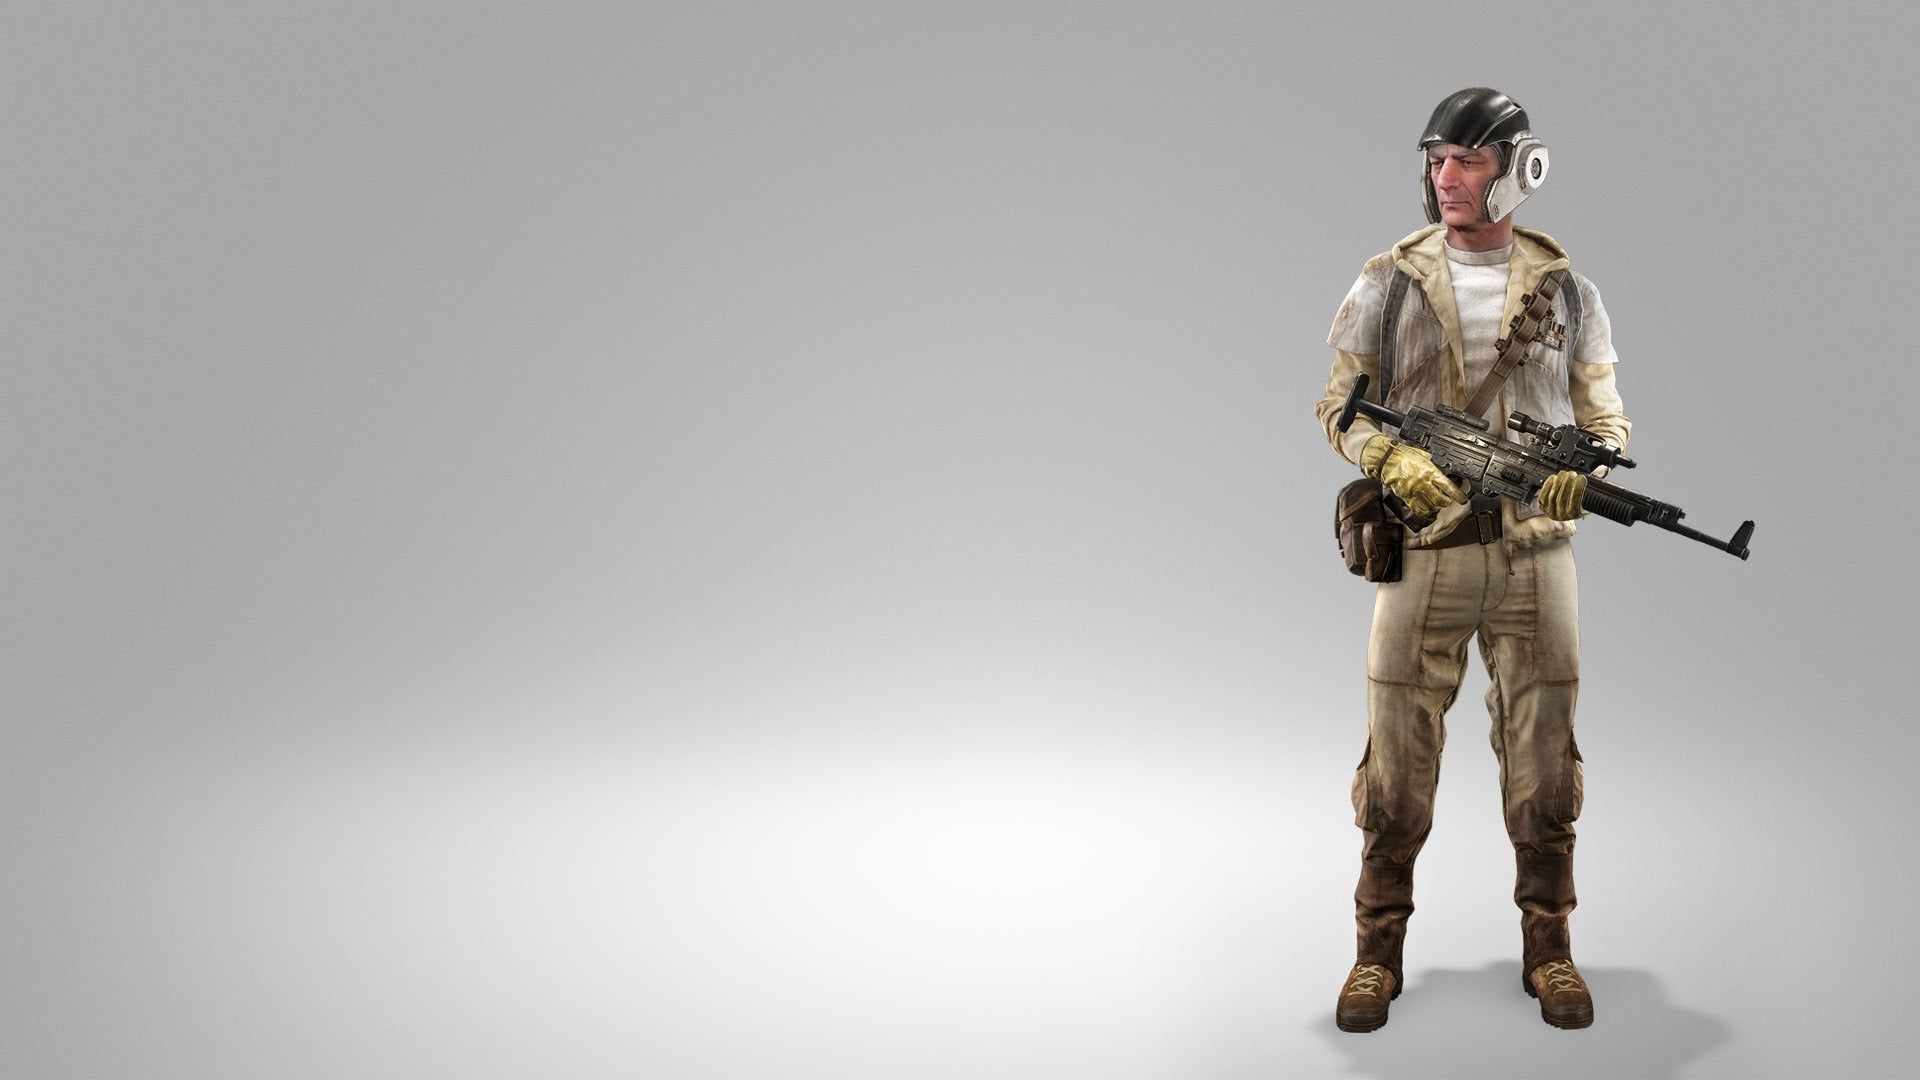 What exactly is the helmet on this rebel/ New republic trooper?